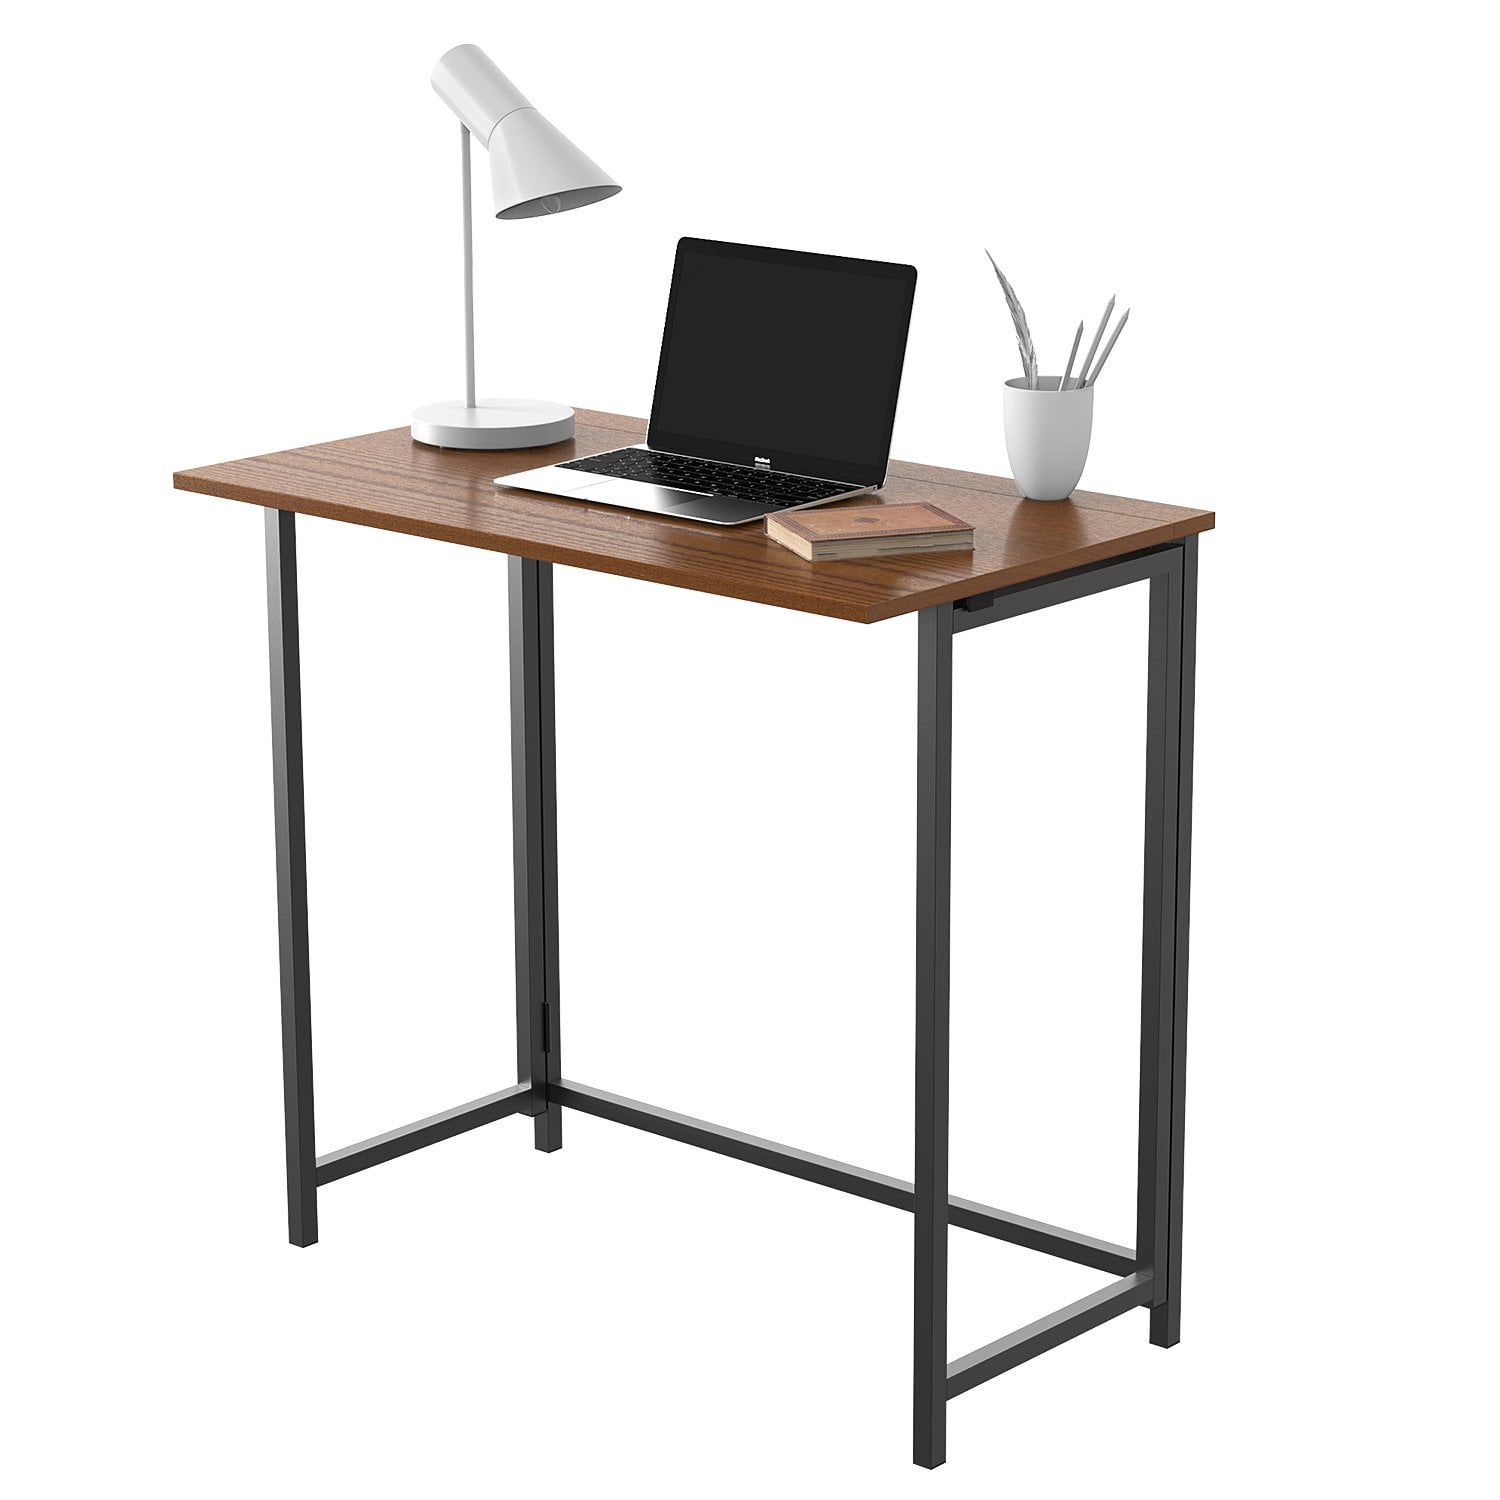 Details about   Modern Folding Computer Desk Table Laptop PC Writing Study Workstation Office US 